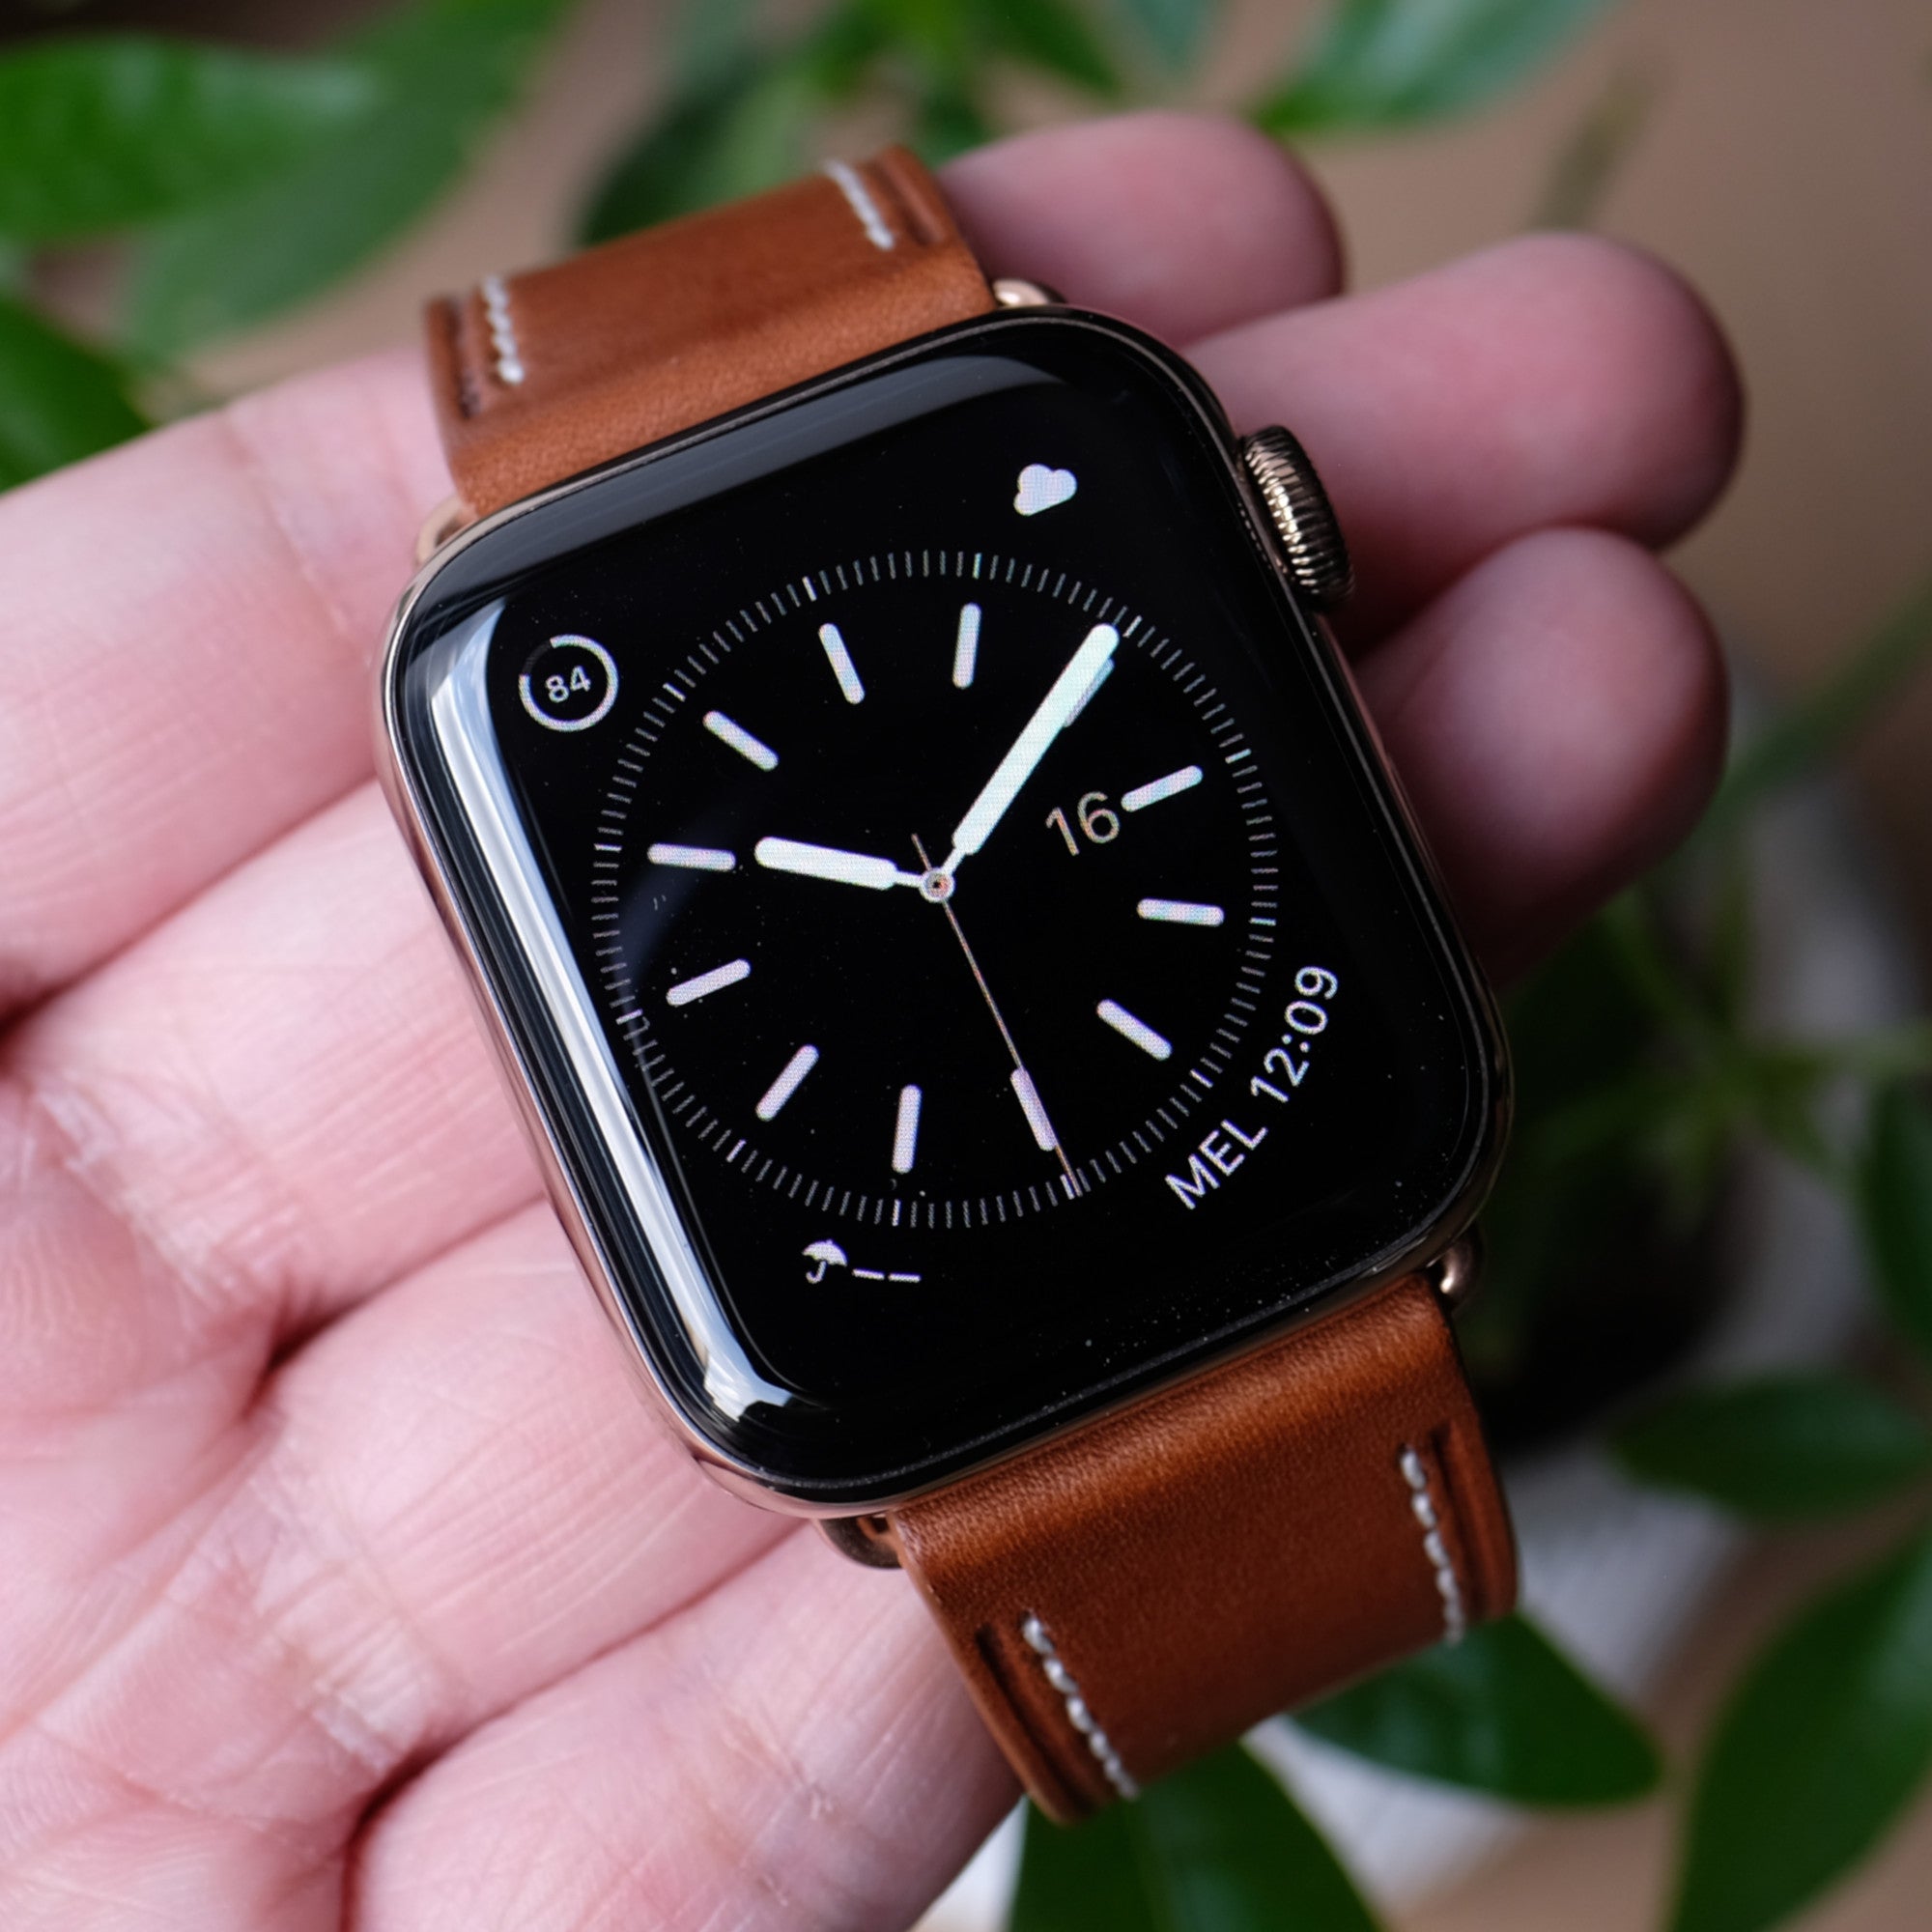 Papilio Clasp Luxury Leather Apple Watch Band